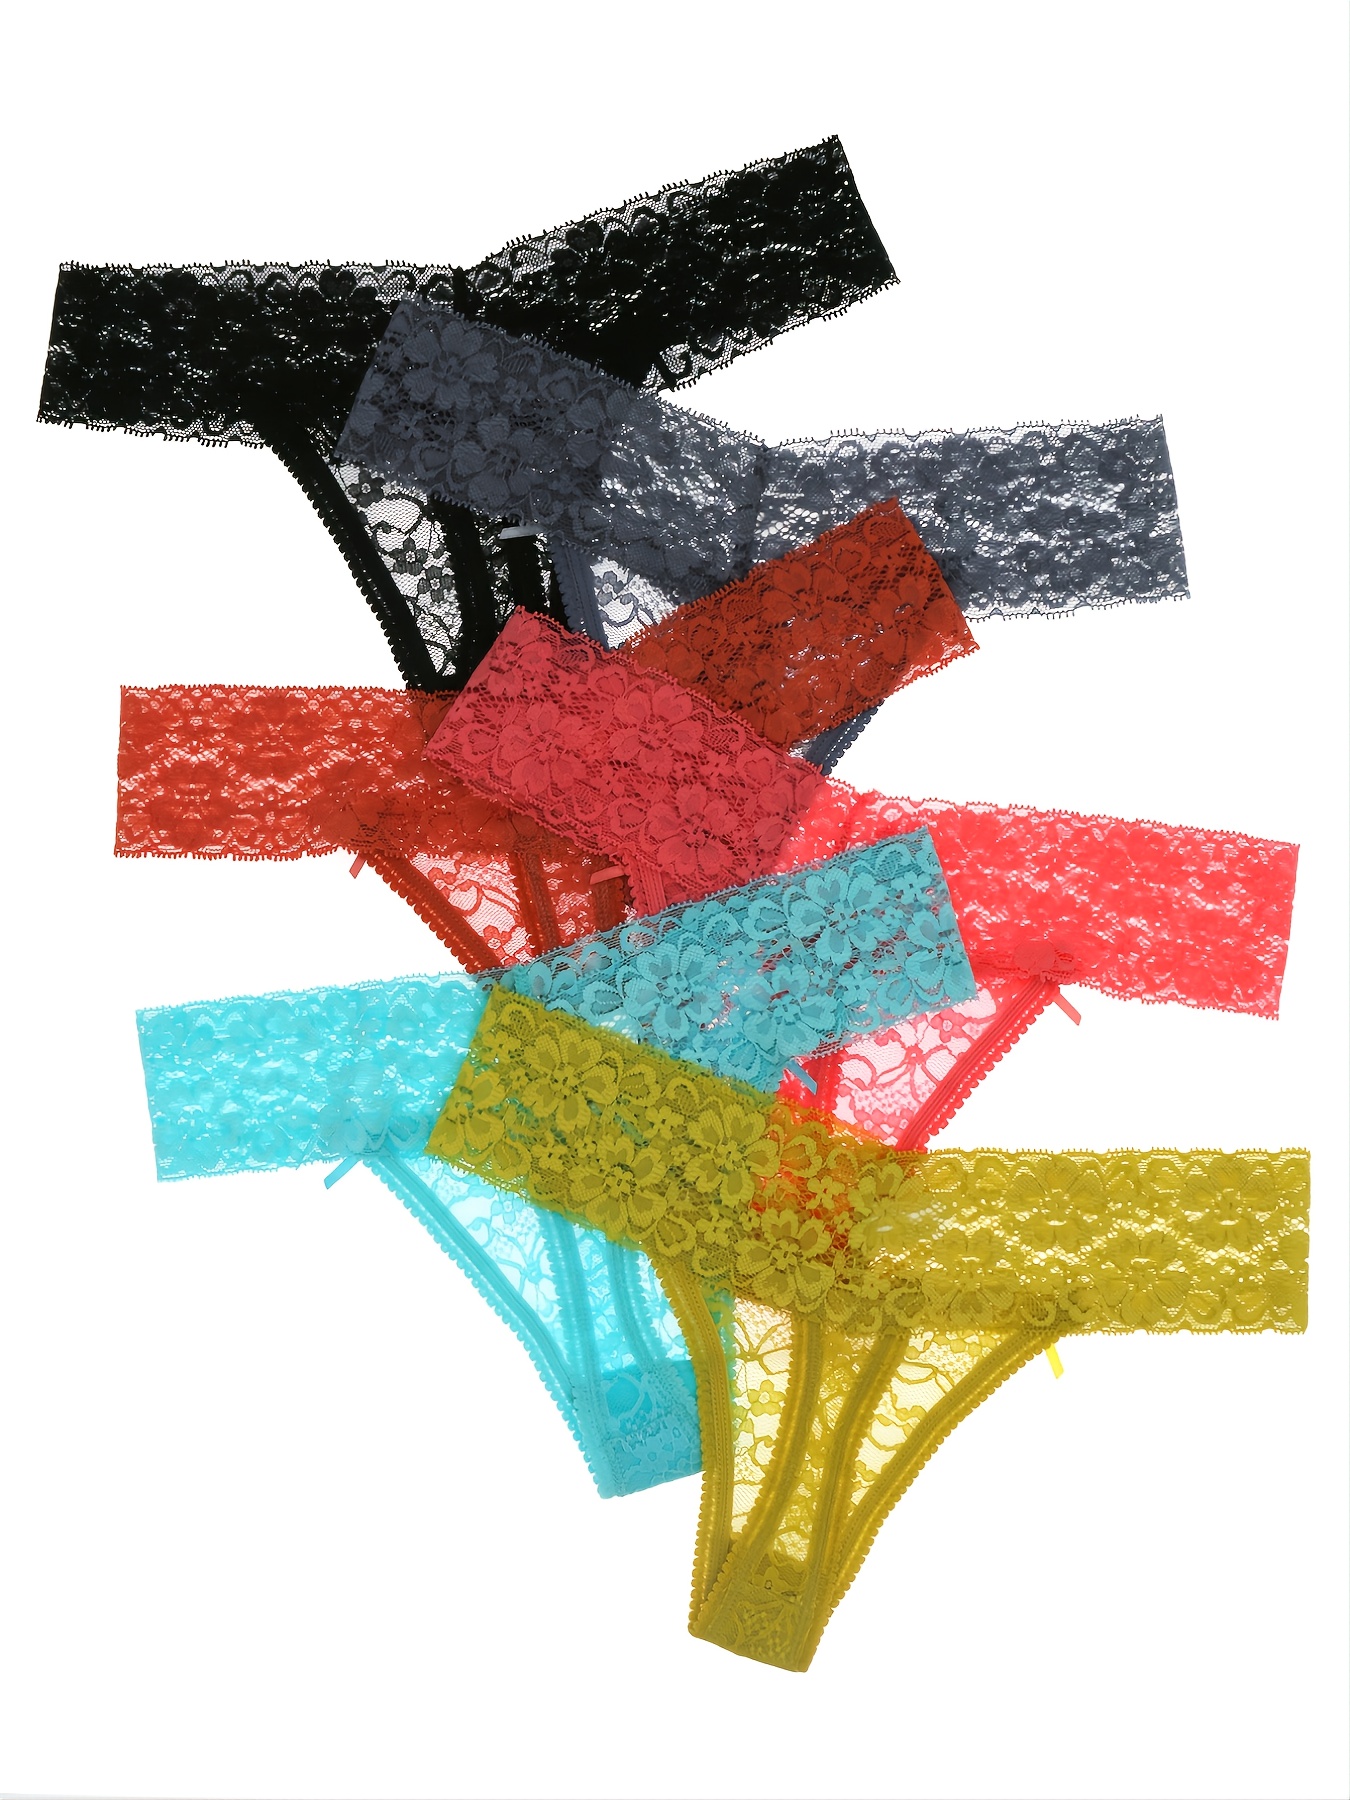 PRIMARK LACE THONGS KNICKERS UNDERWEAR VARIOUS COLOURS 3 PACK